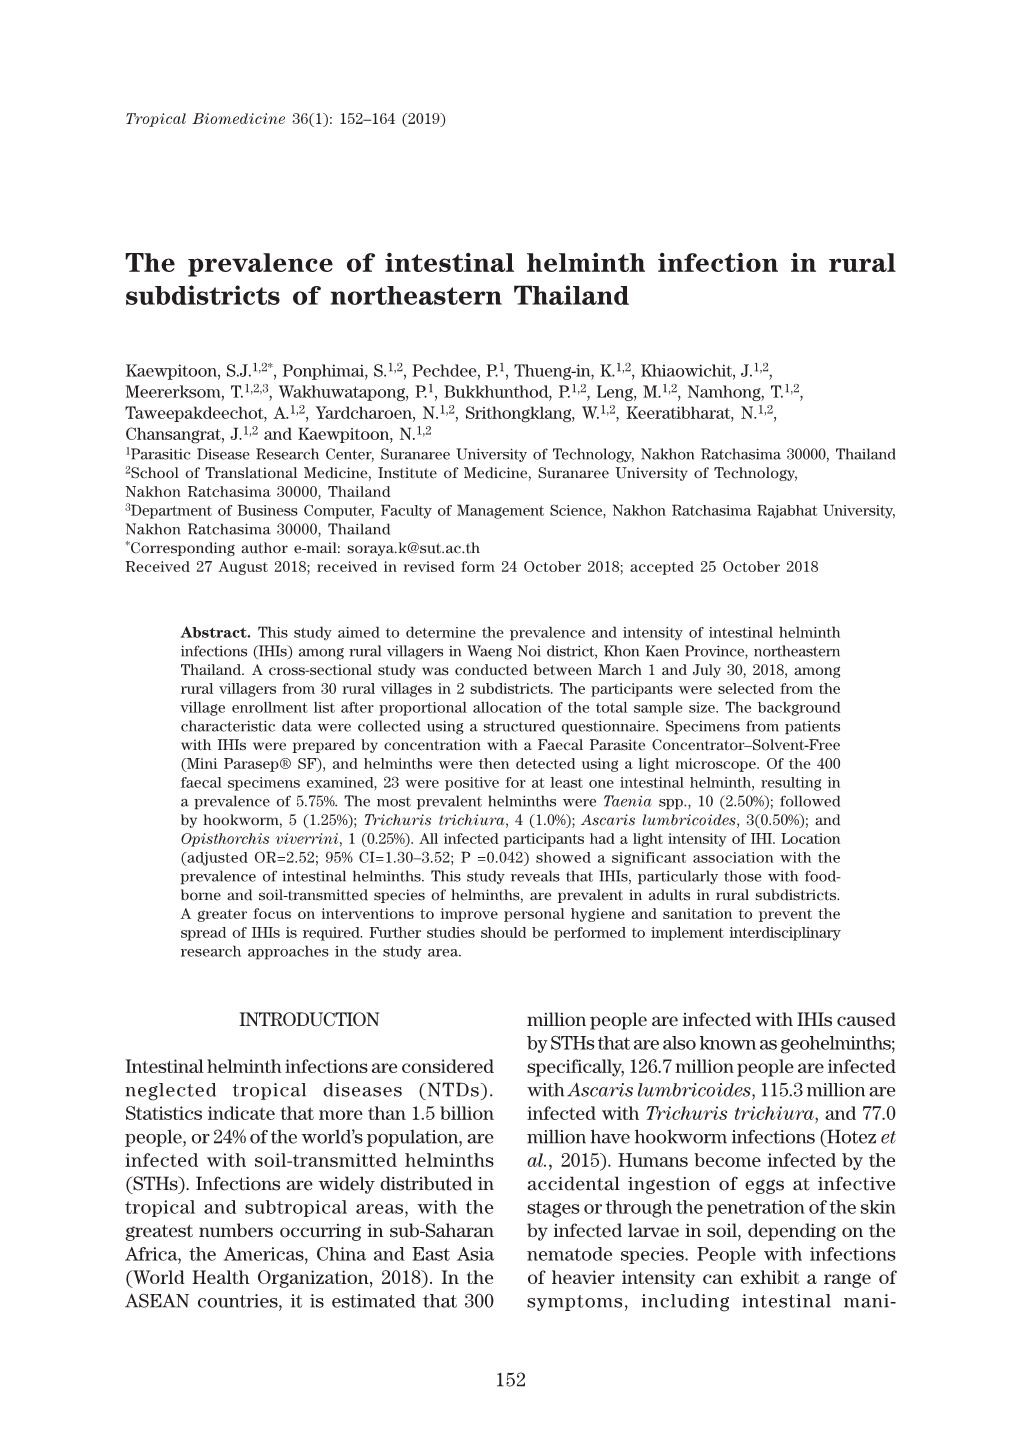 The Prevalence of Intestinal Helminth Infection in Rural Subdistricts of Northeastern Thailand